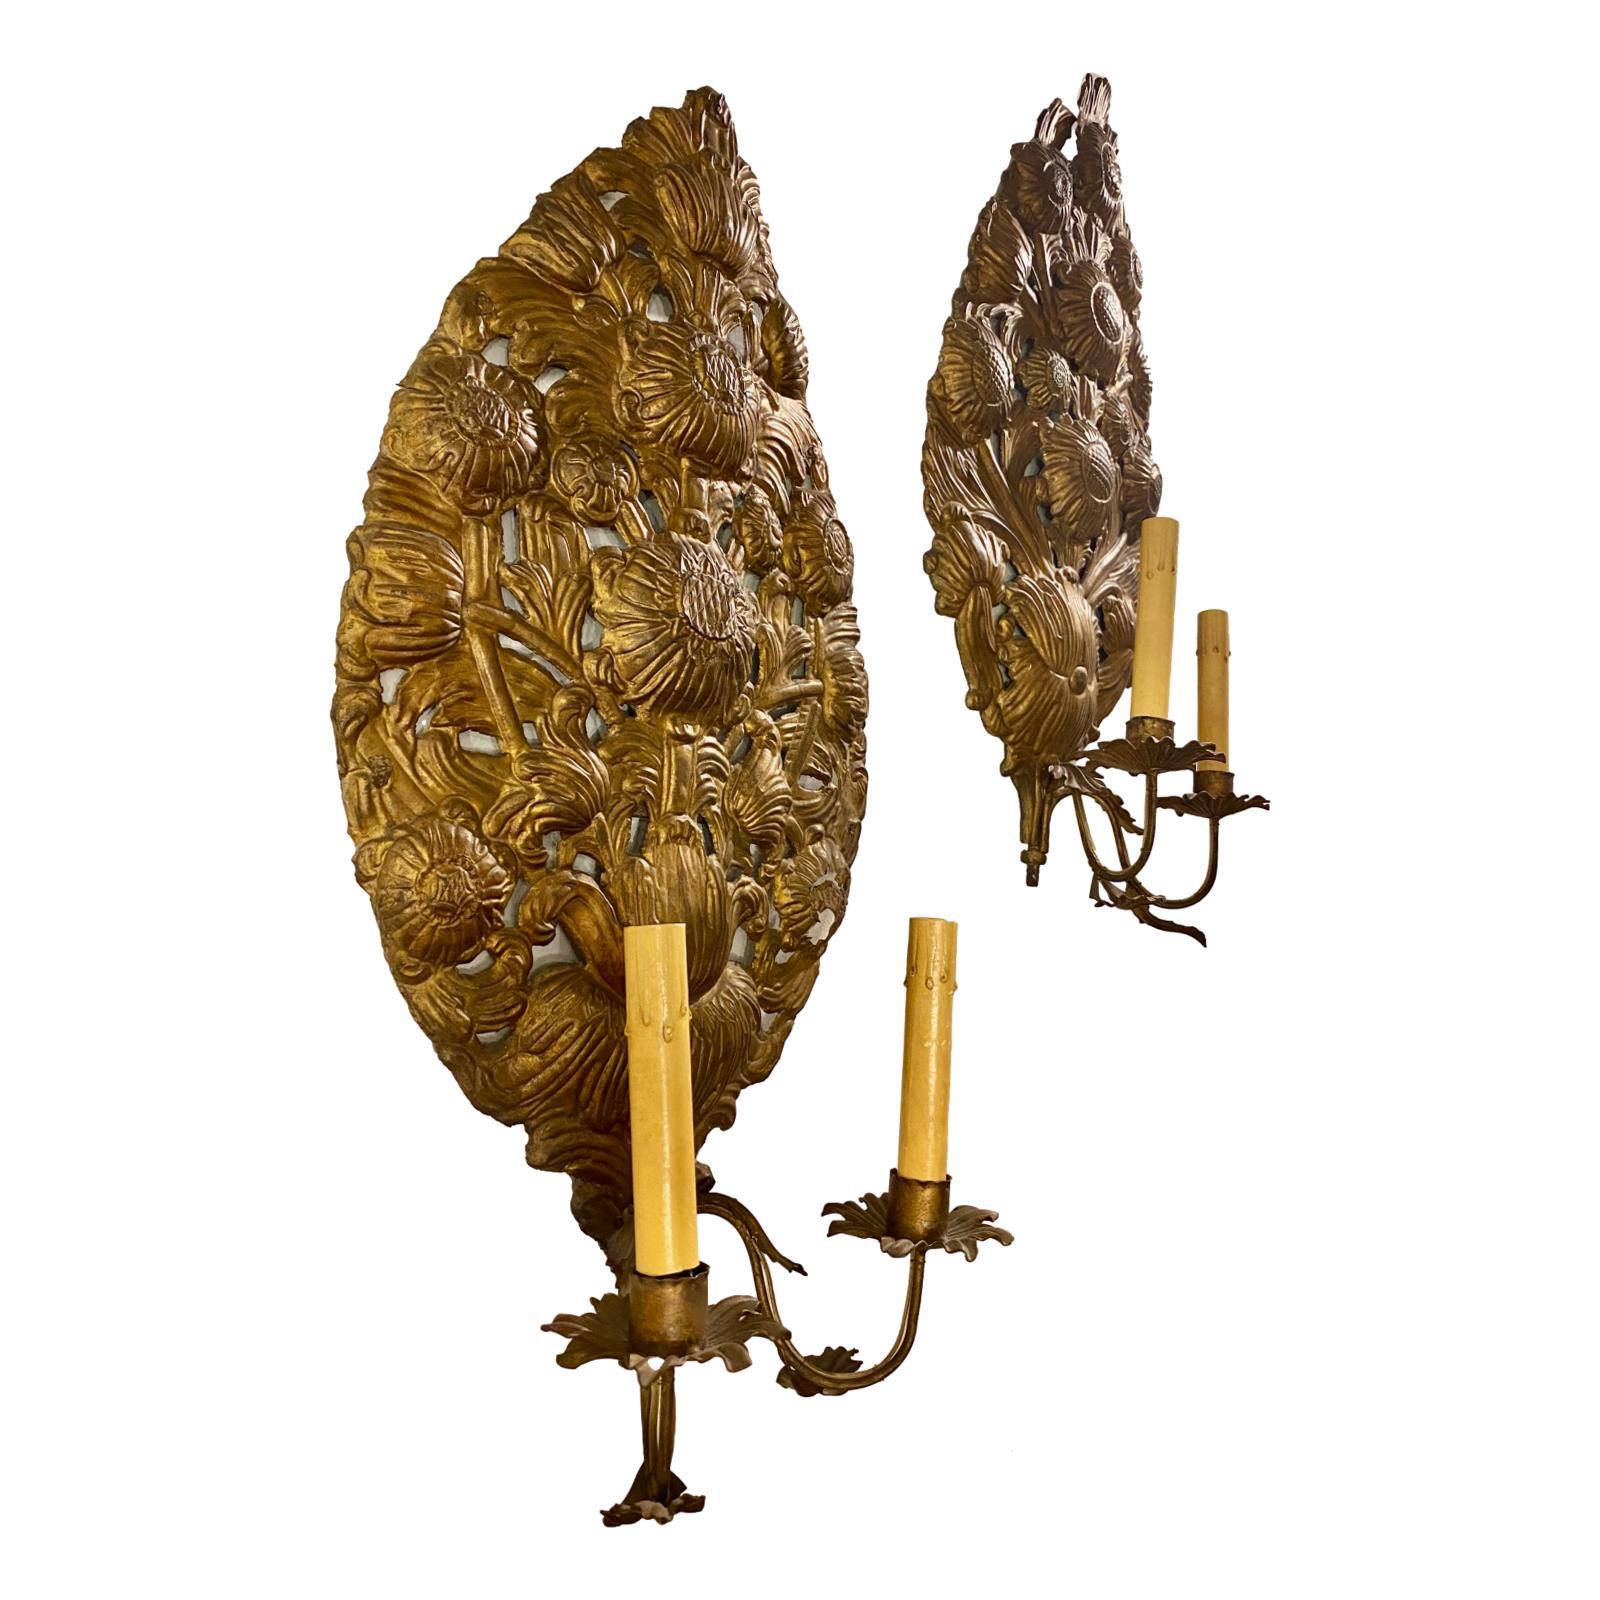 Pair of circa 1900 Italian repoussé metal two-arm sconces in the shape of flower bouquets.

Measurements:
Height: 22